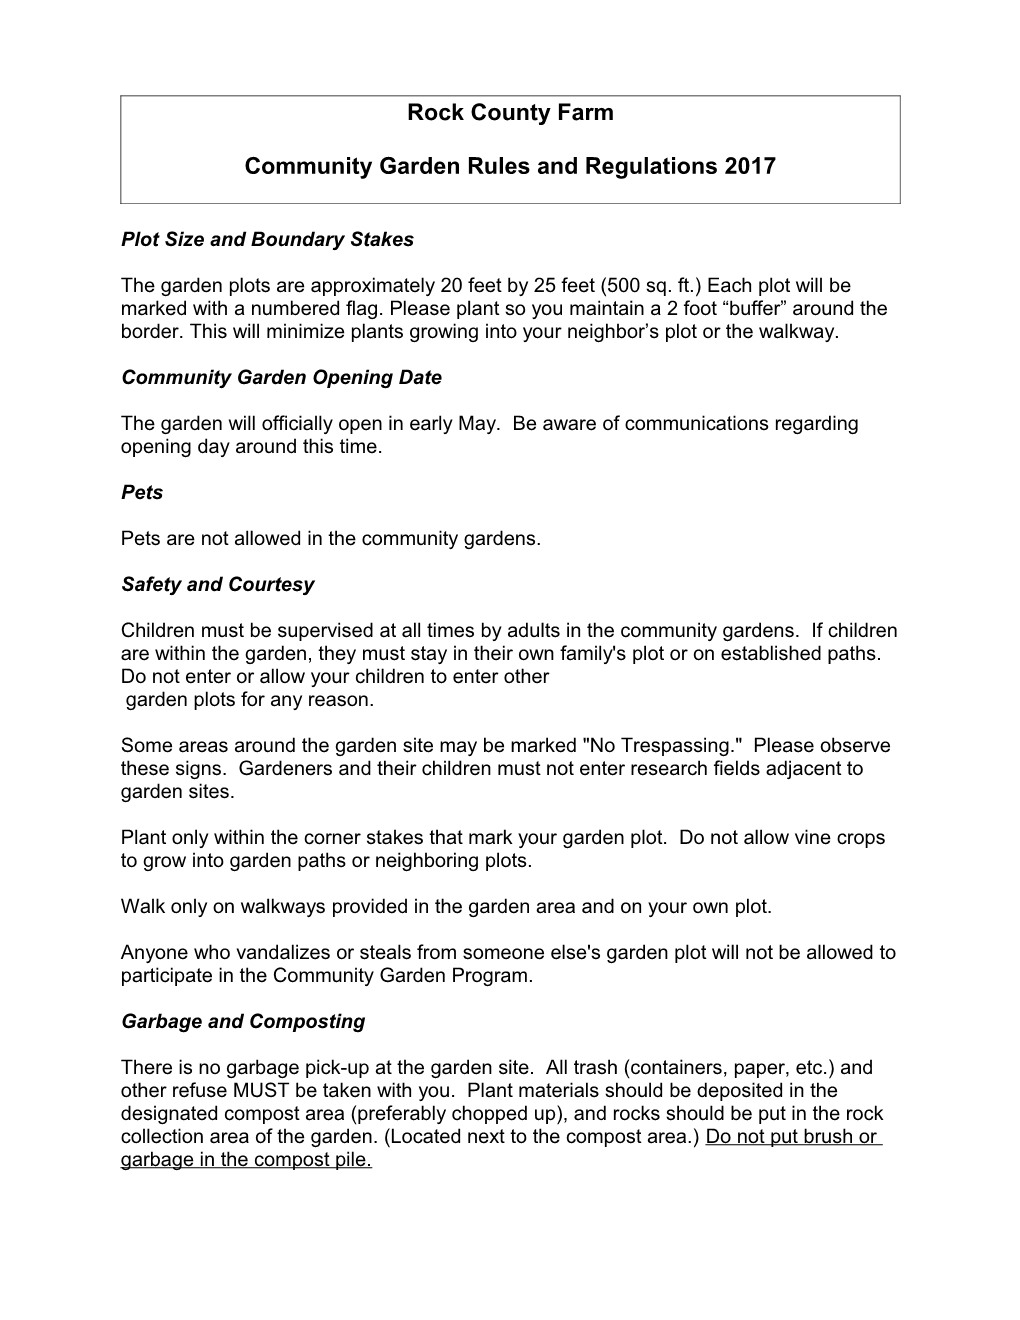 2002 Proposed Urban Garden Rules and Regulations